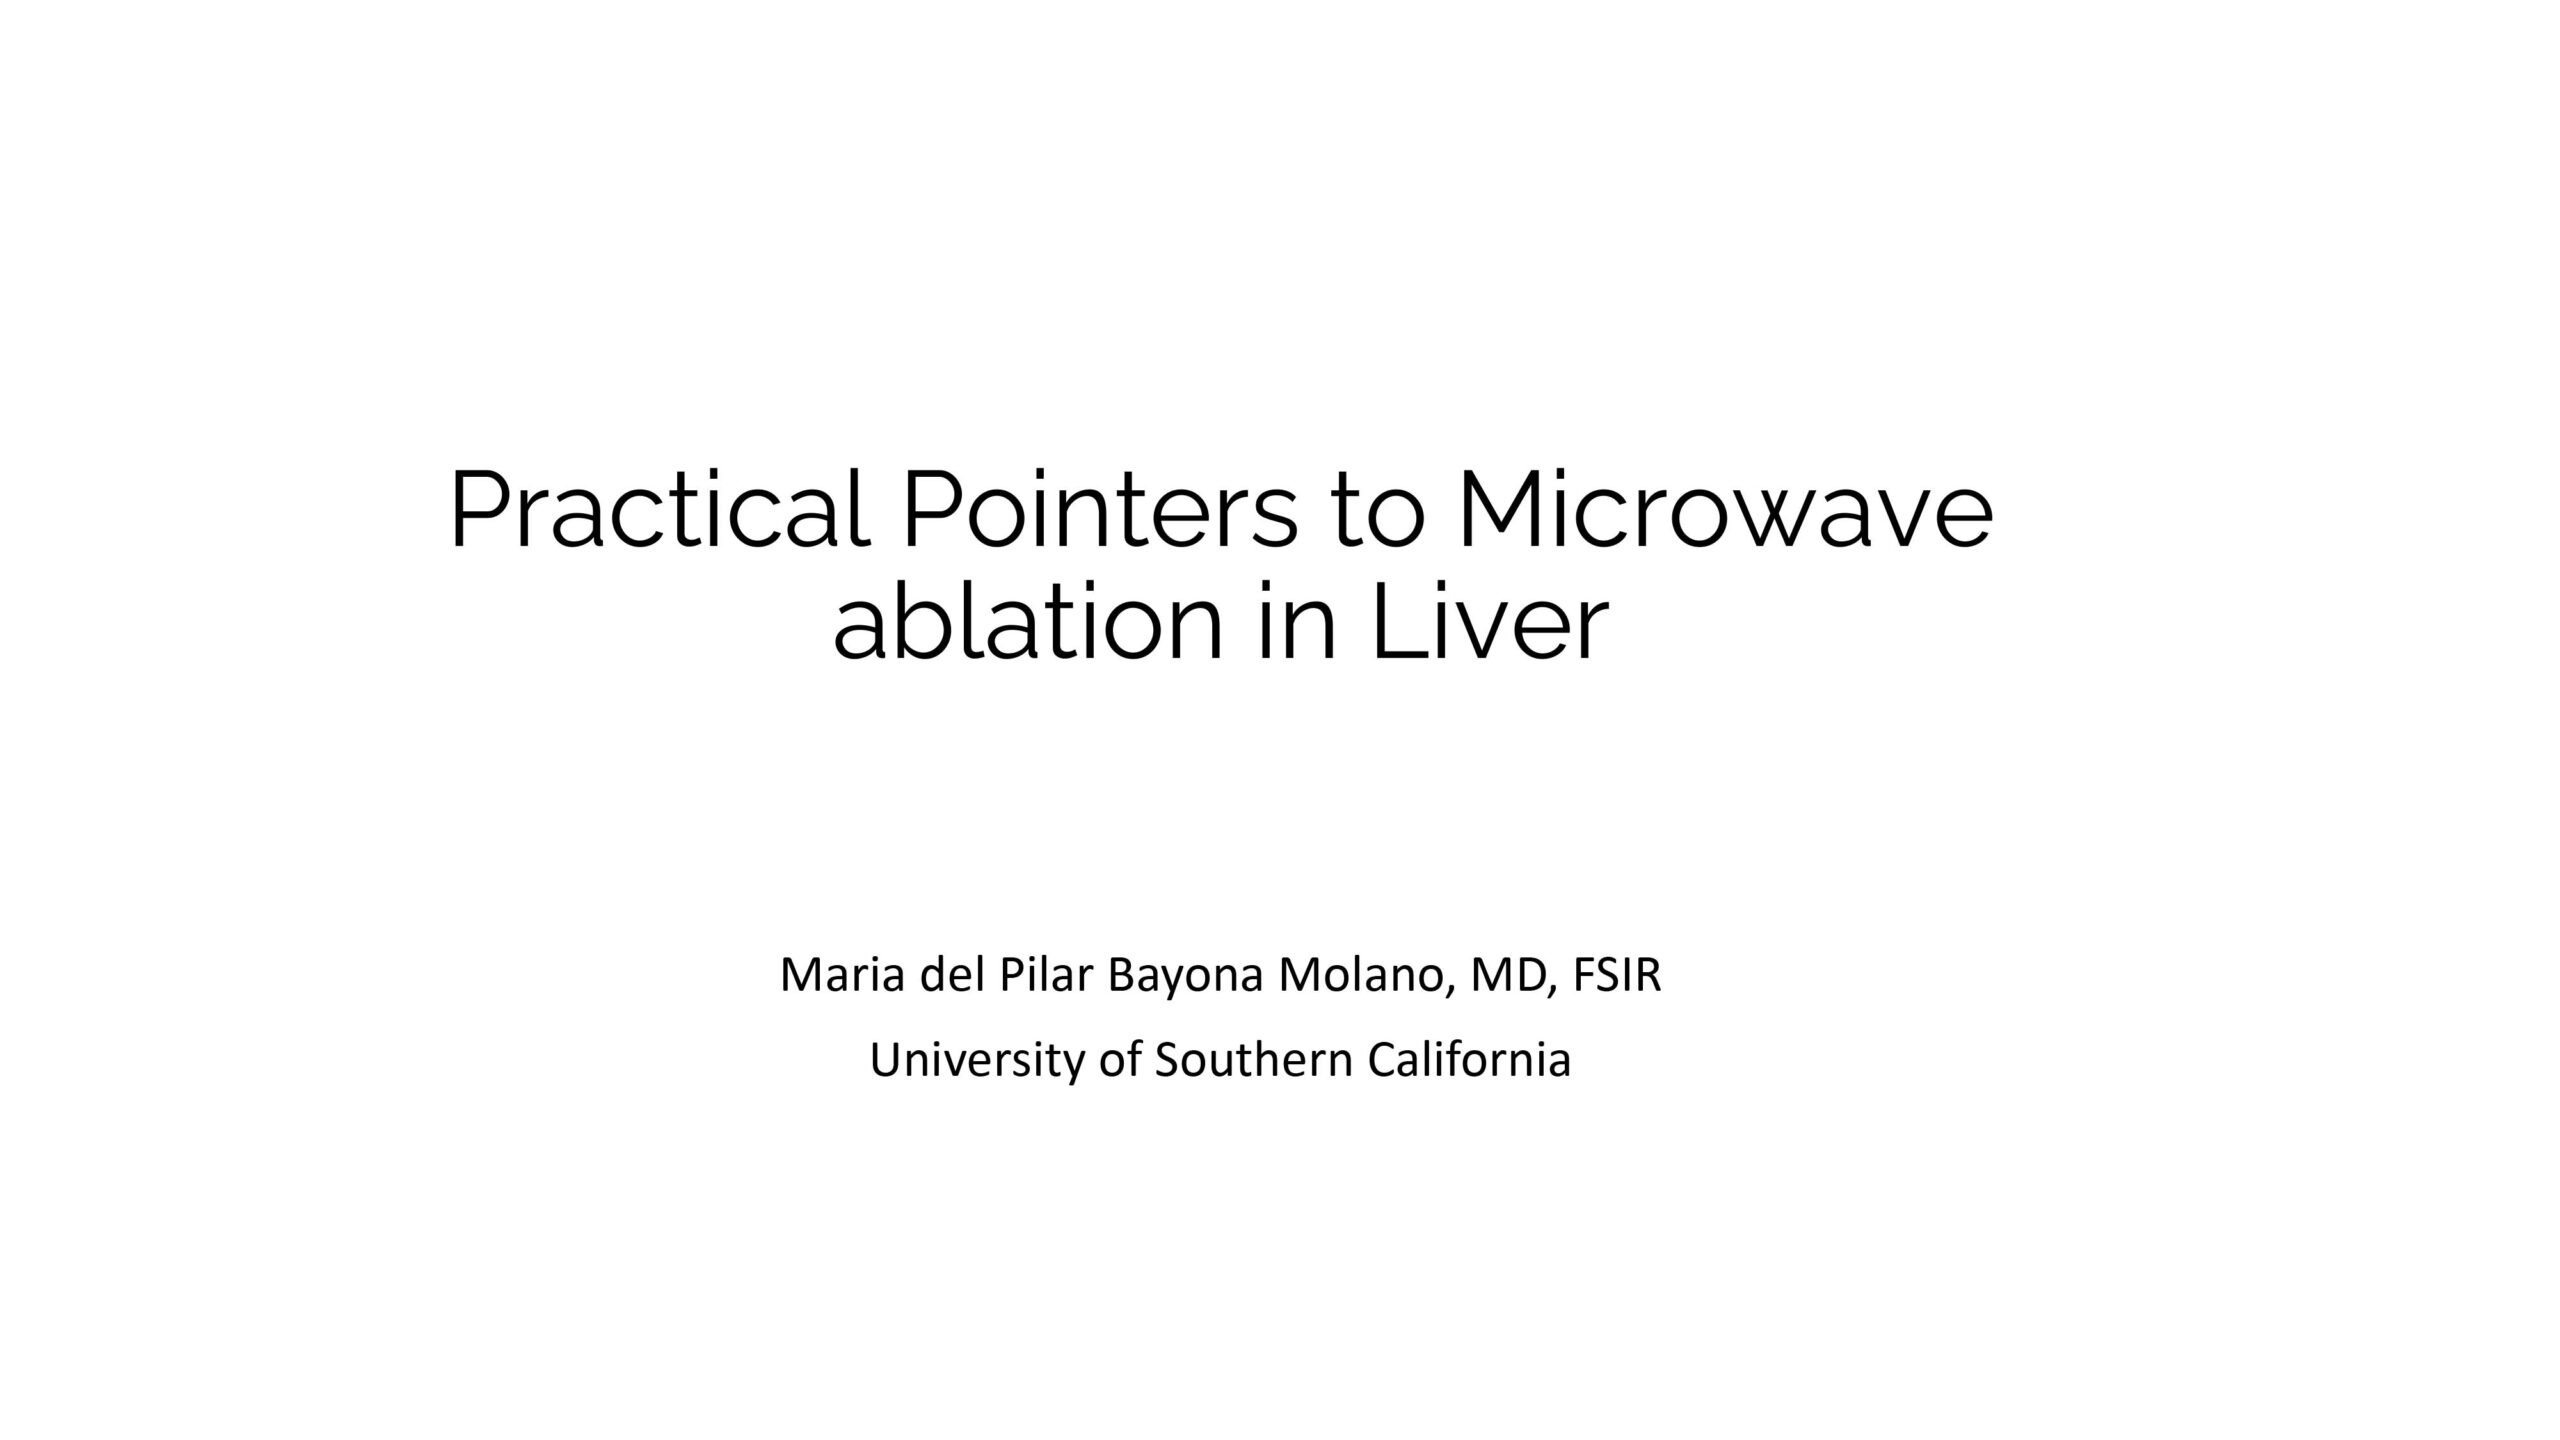 Practical Pointers to Microwave ablation in Liver